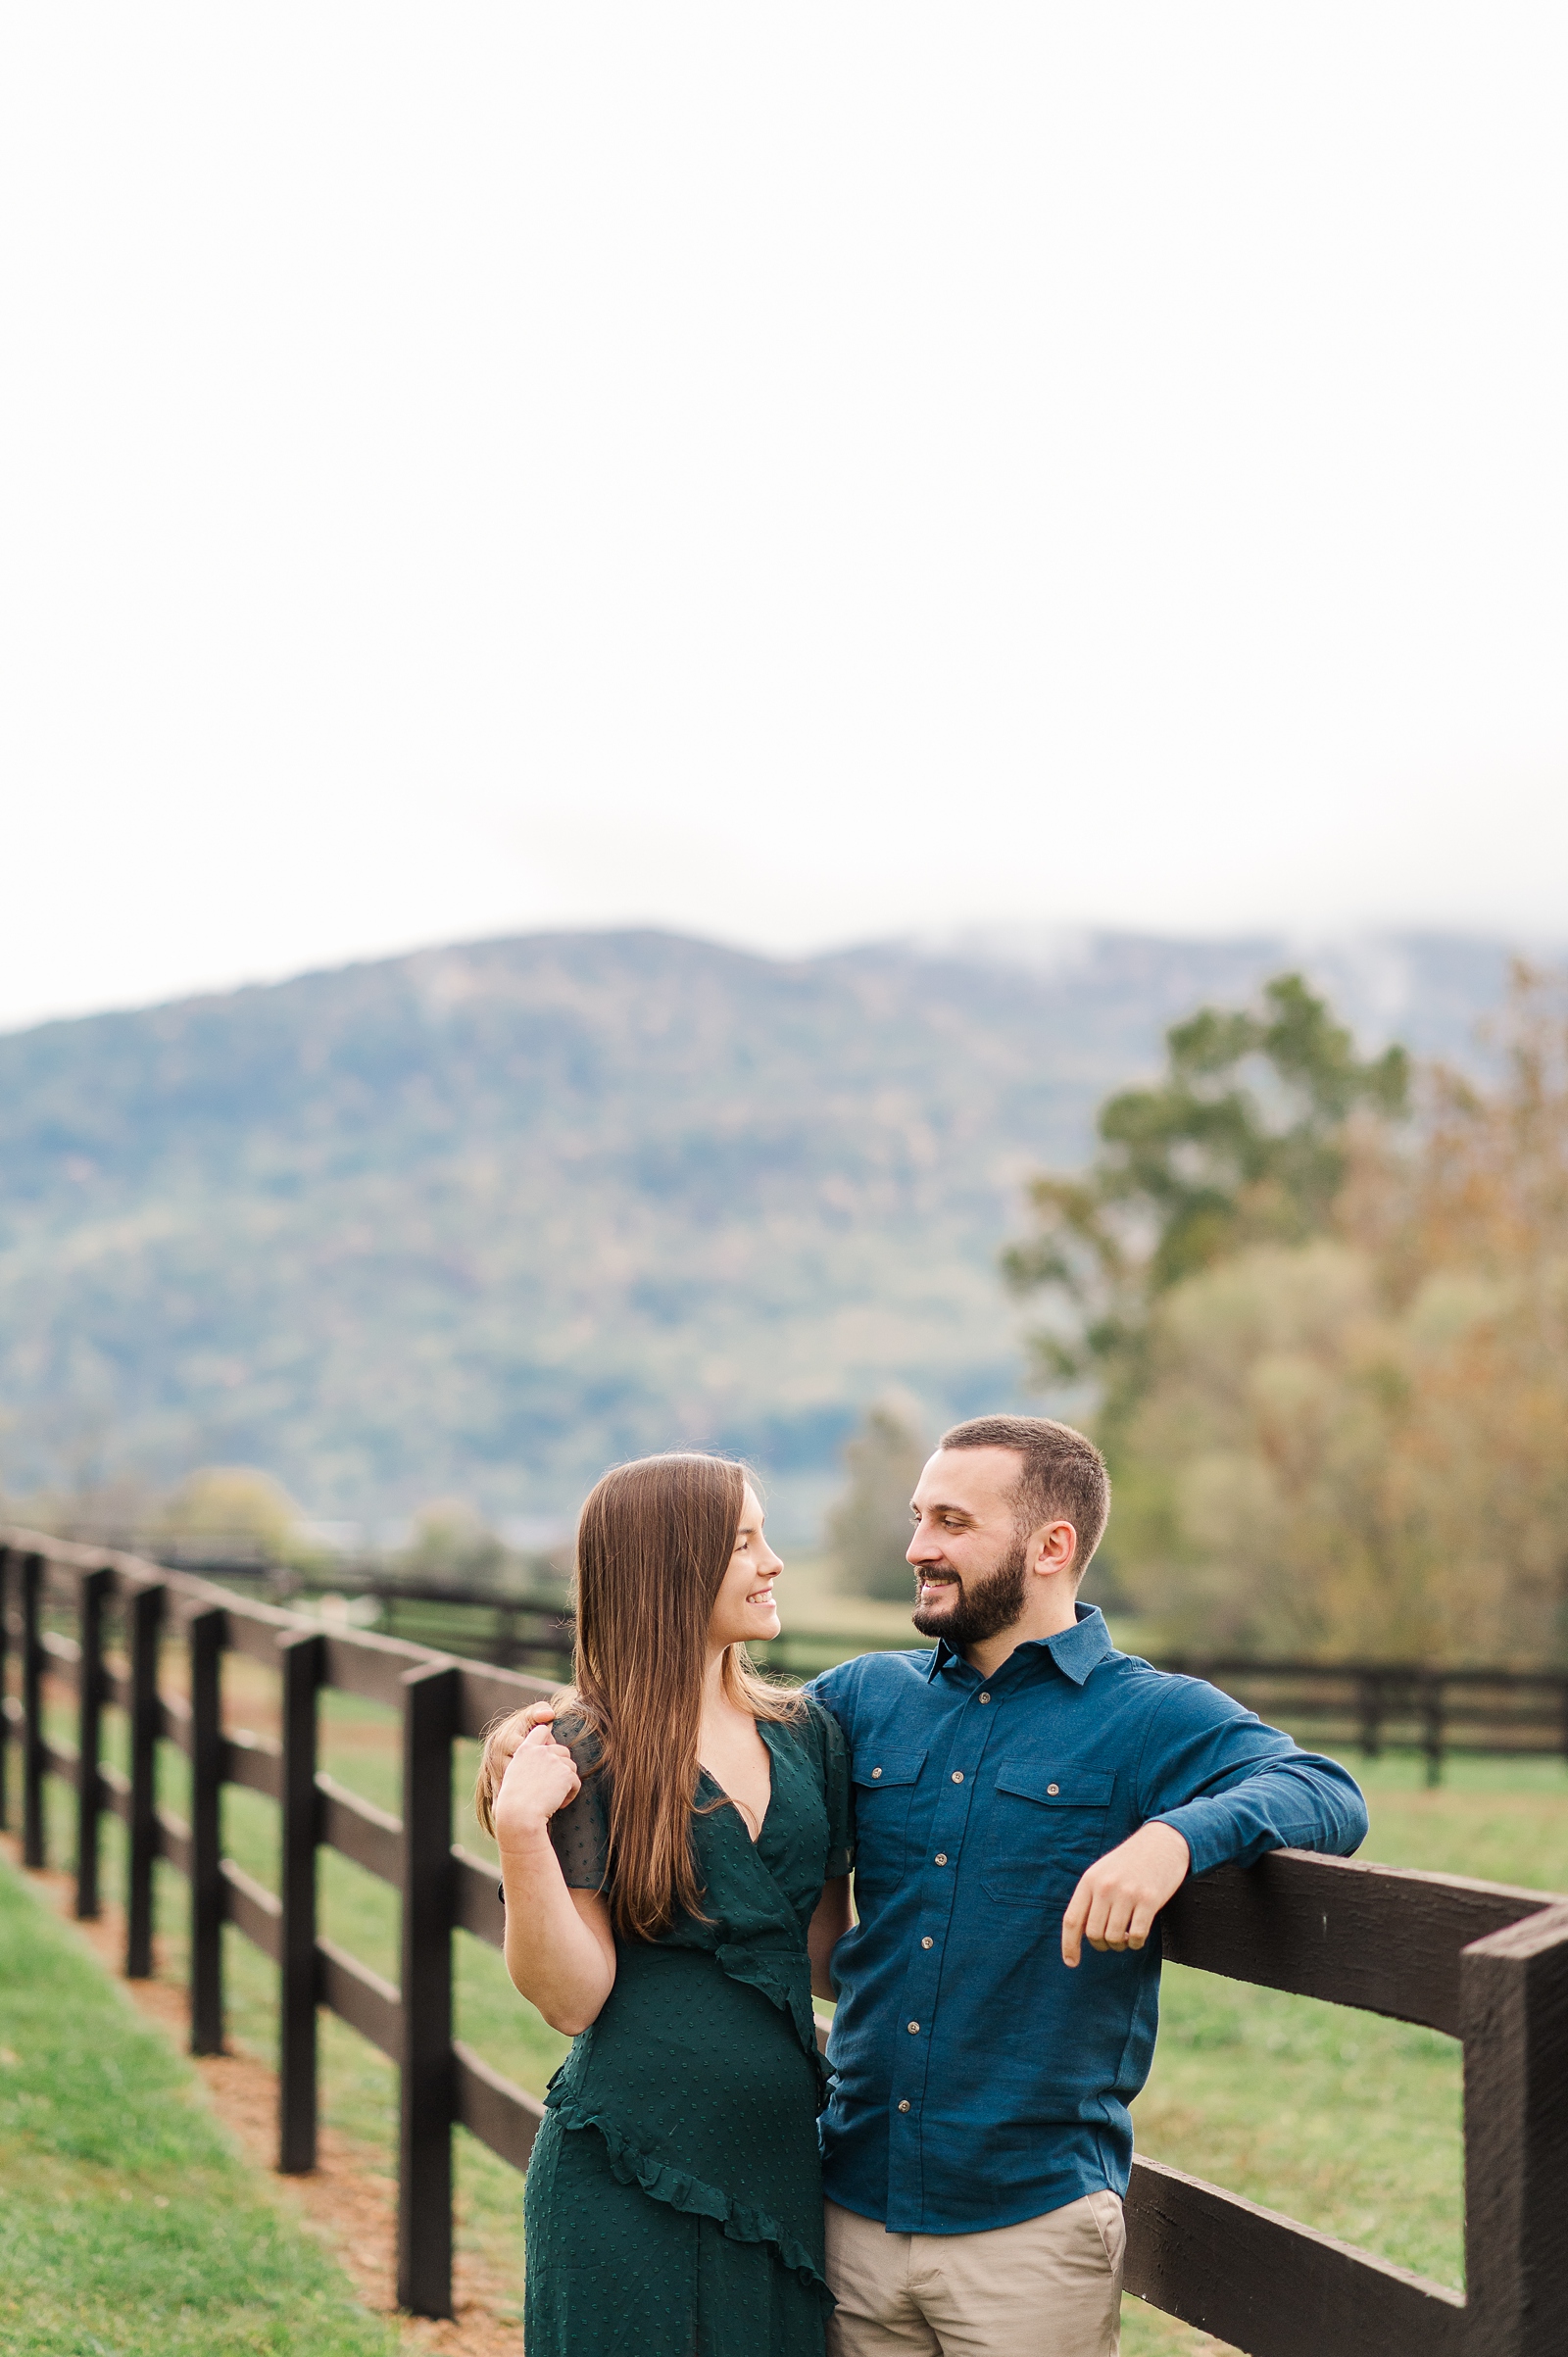 Mountain Views at King Family Vineyards Engagement Session. Richmond Wedding Photographer Kailey Brianne Photography 